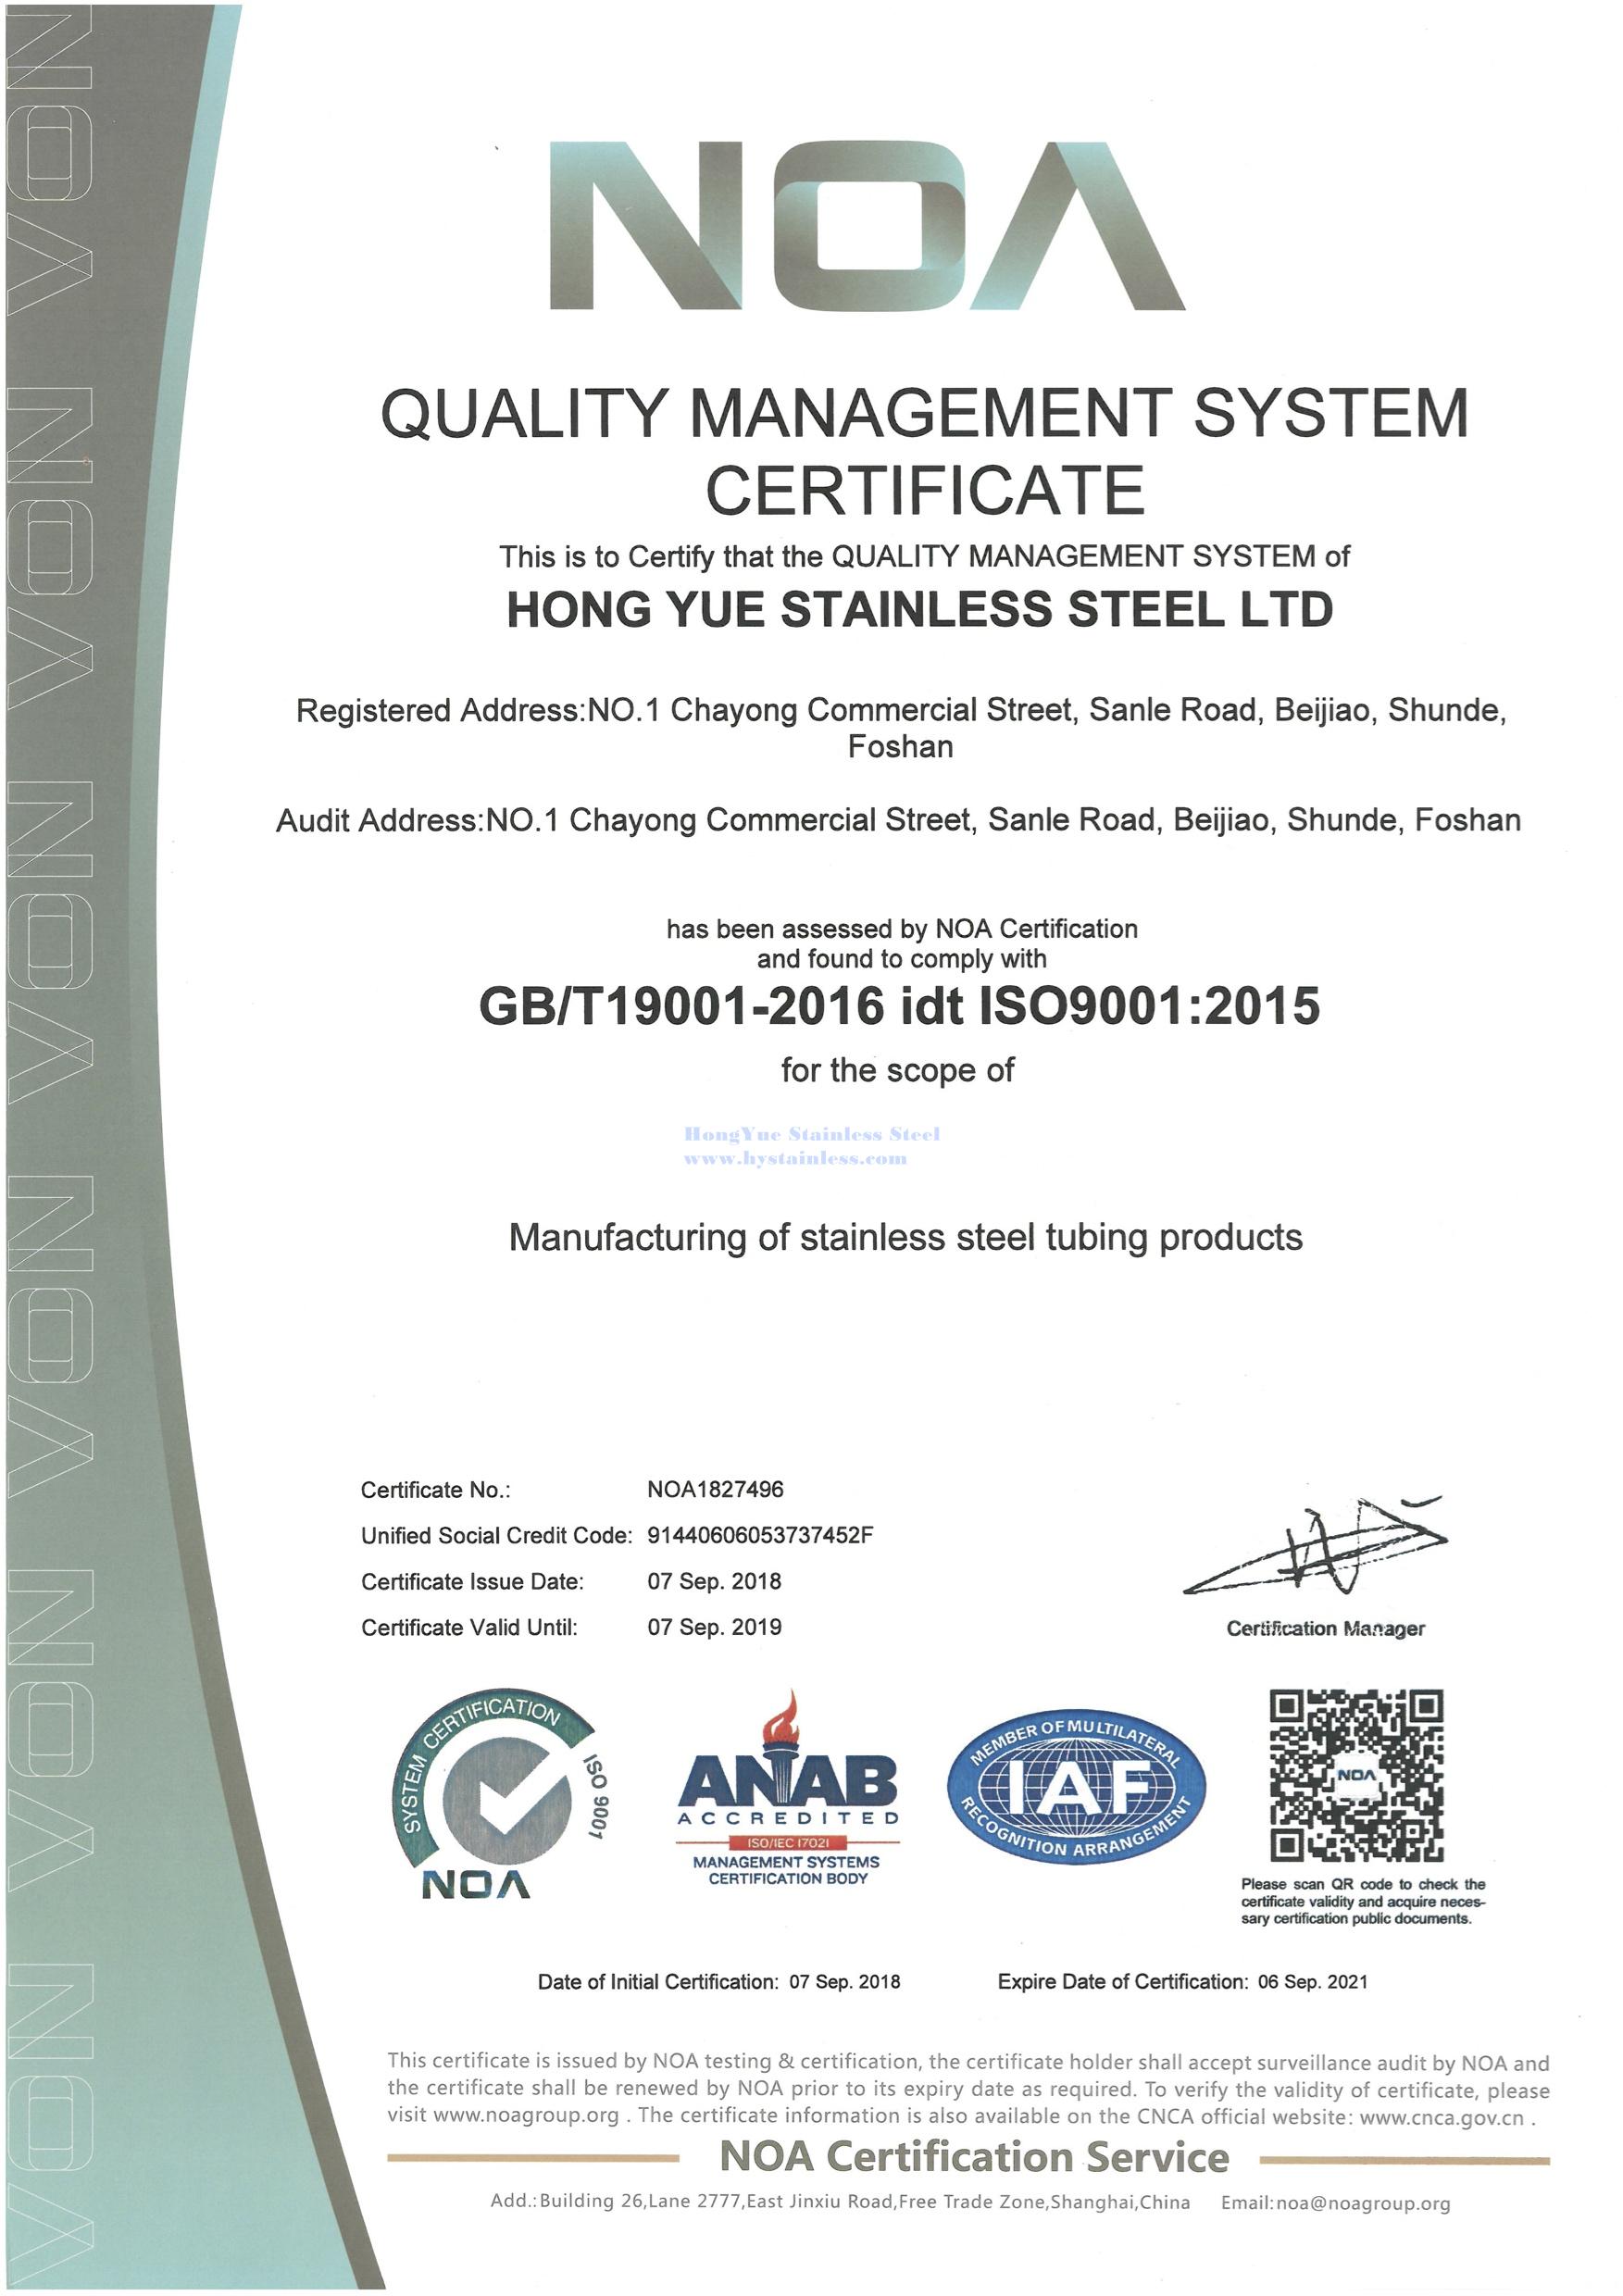 ISO 9001 - <a href=http://www.hystainless.com target='_blank'><a href=http://www.hystainless.com target='_blank'>Hong Yue Stainless Steel</a></a>